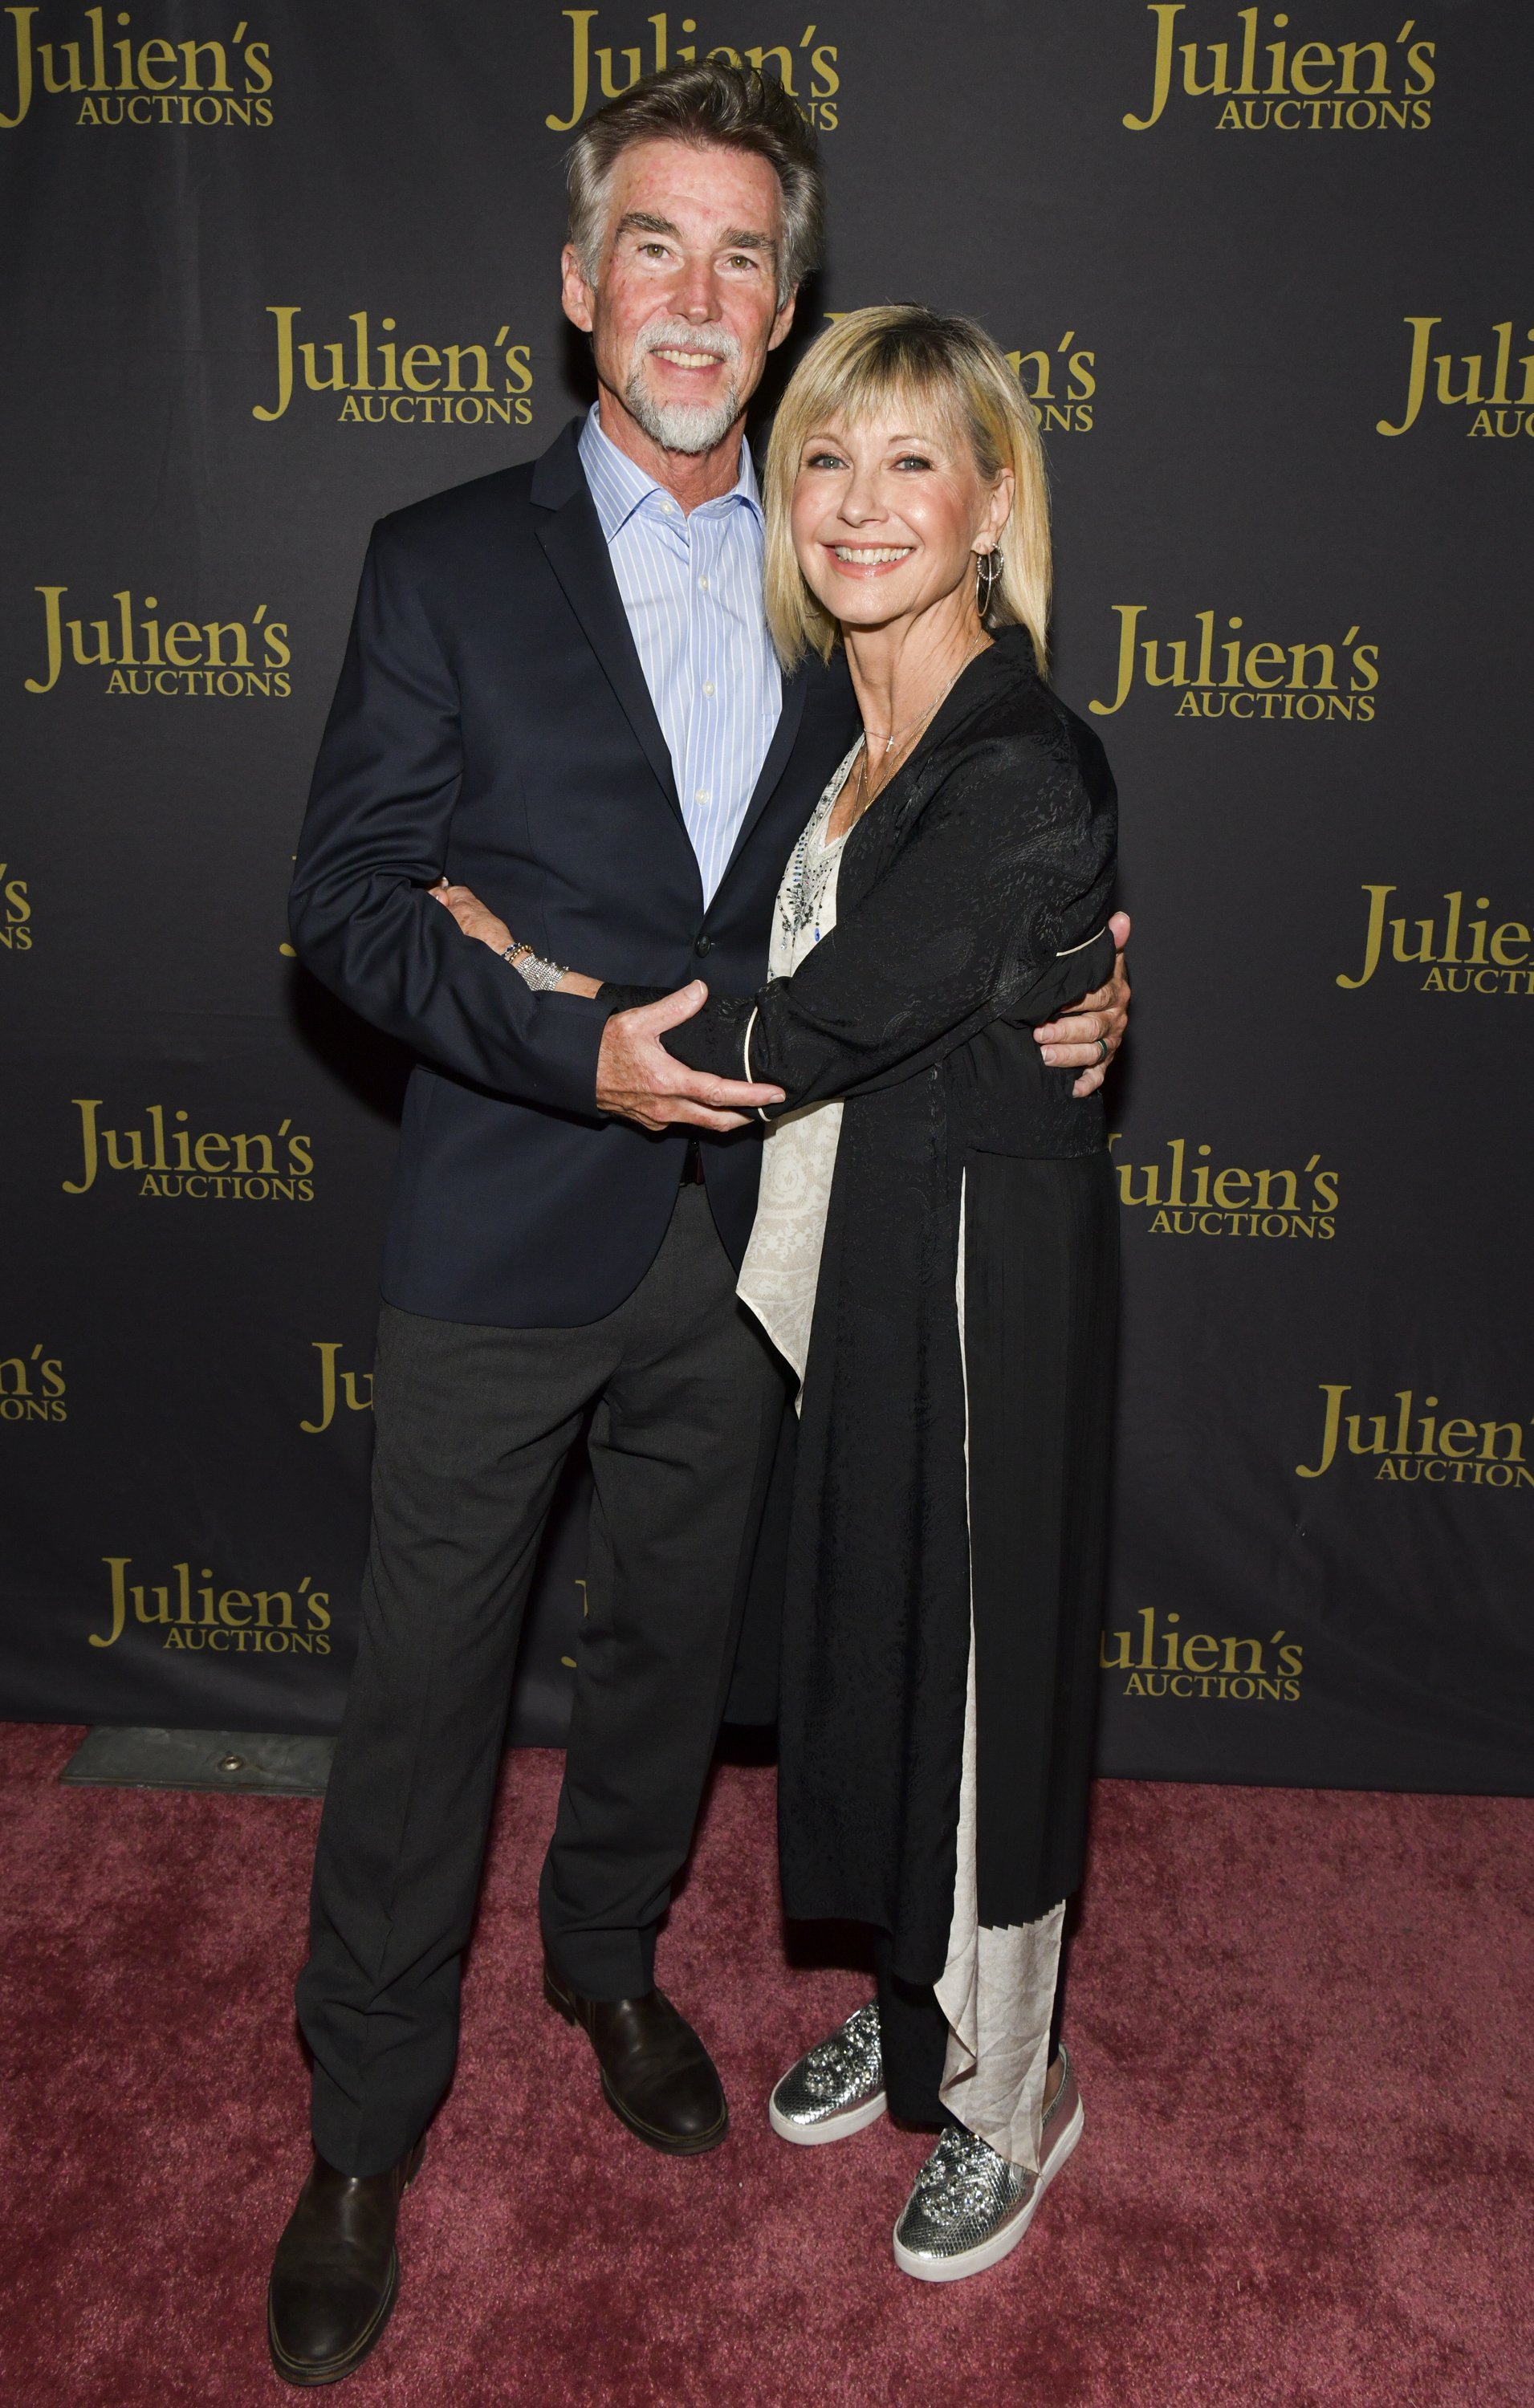 Olivia Newton-John (R) and John Easterling attend the VIP reception for upcoming "Property of Olivia Newton-John Auction Event at Julien’s Auctions on October 29, 2019 in Beverly Hills, California. | Source: Getty Images